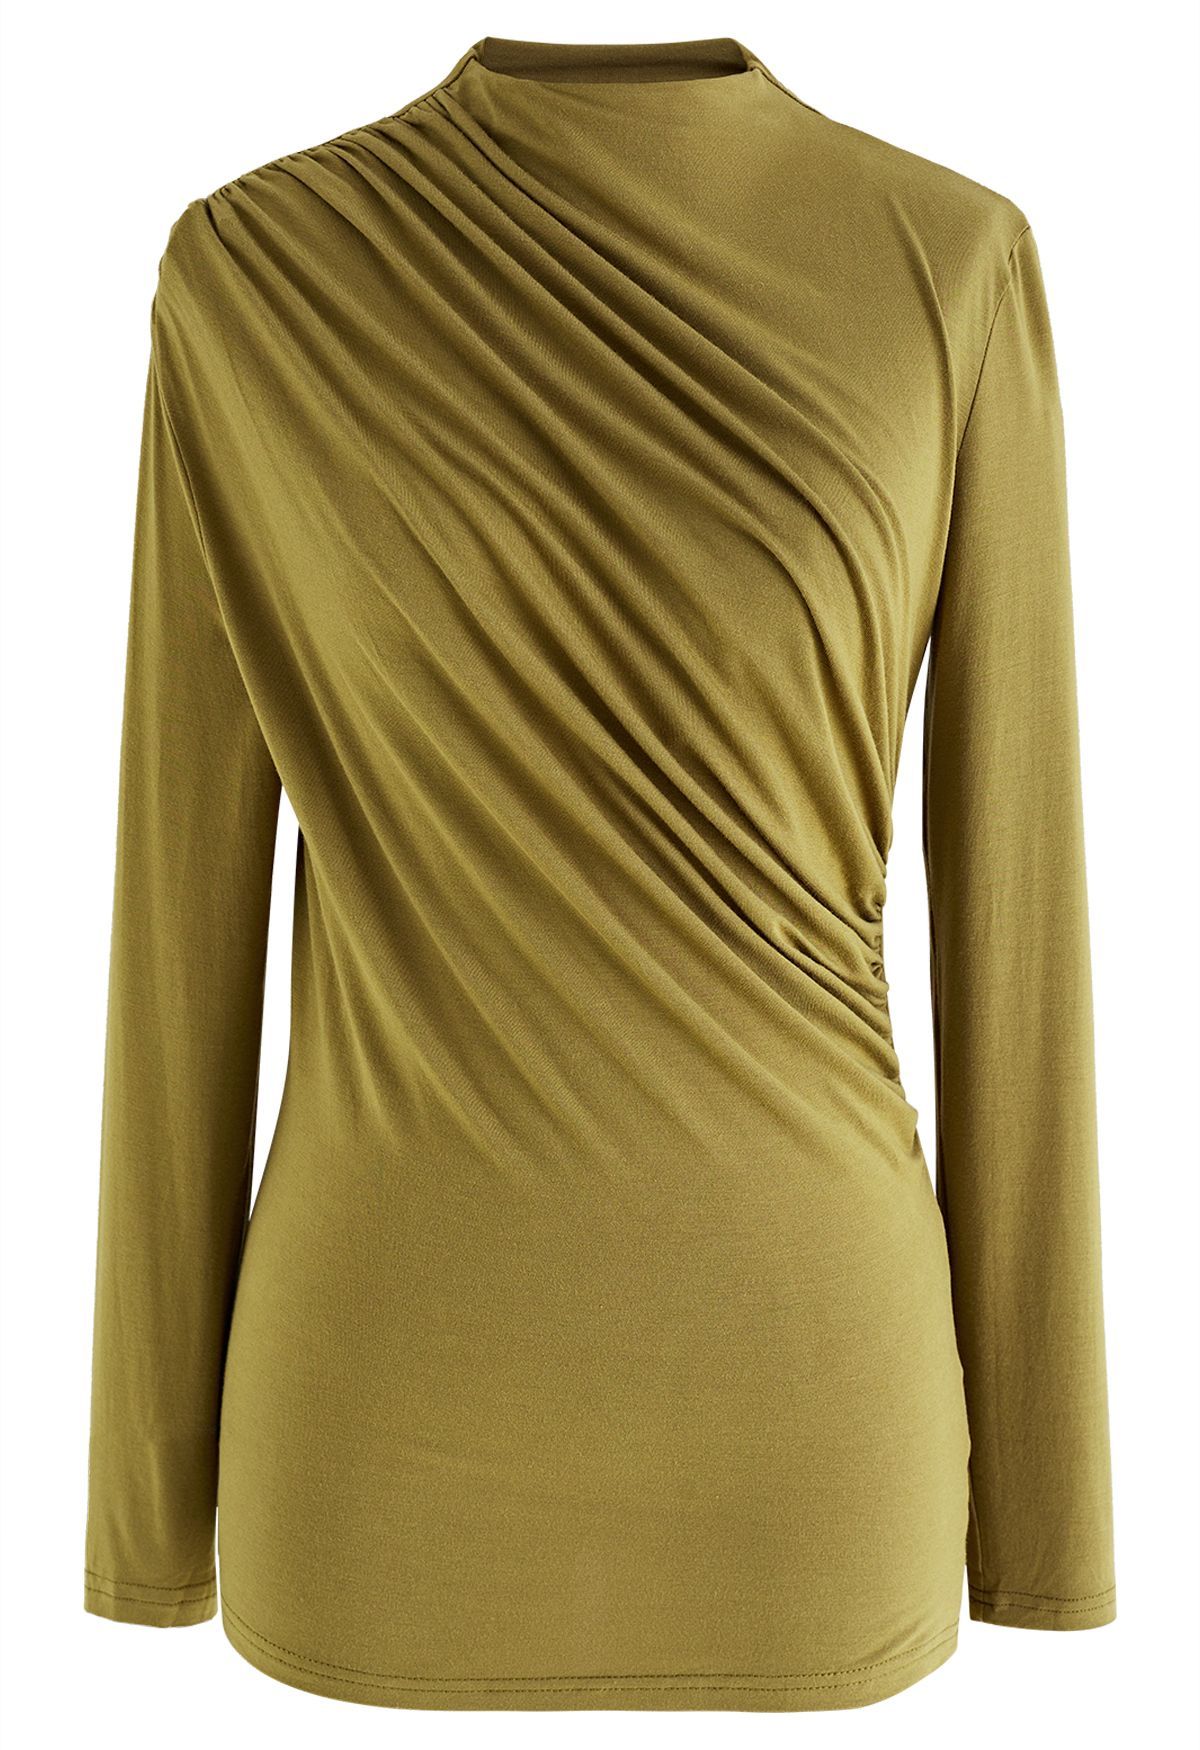 Ruched Long Sleeves Top in Olive | Chicwish